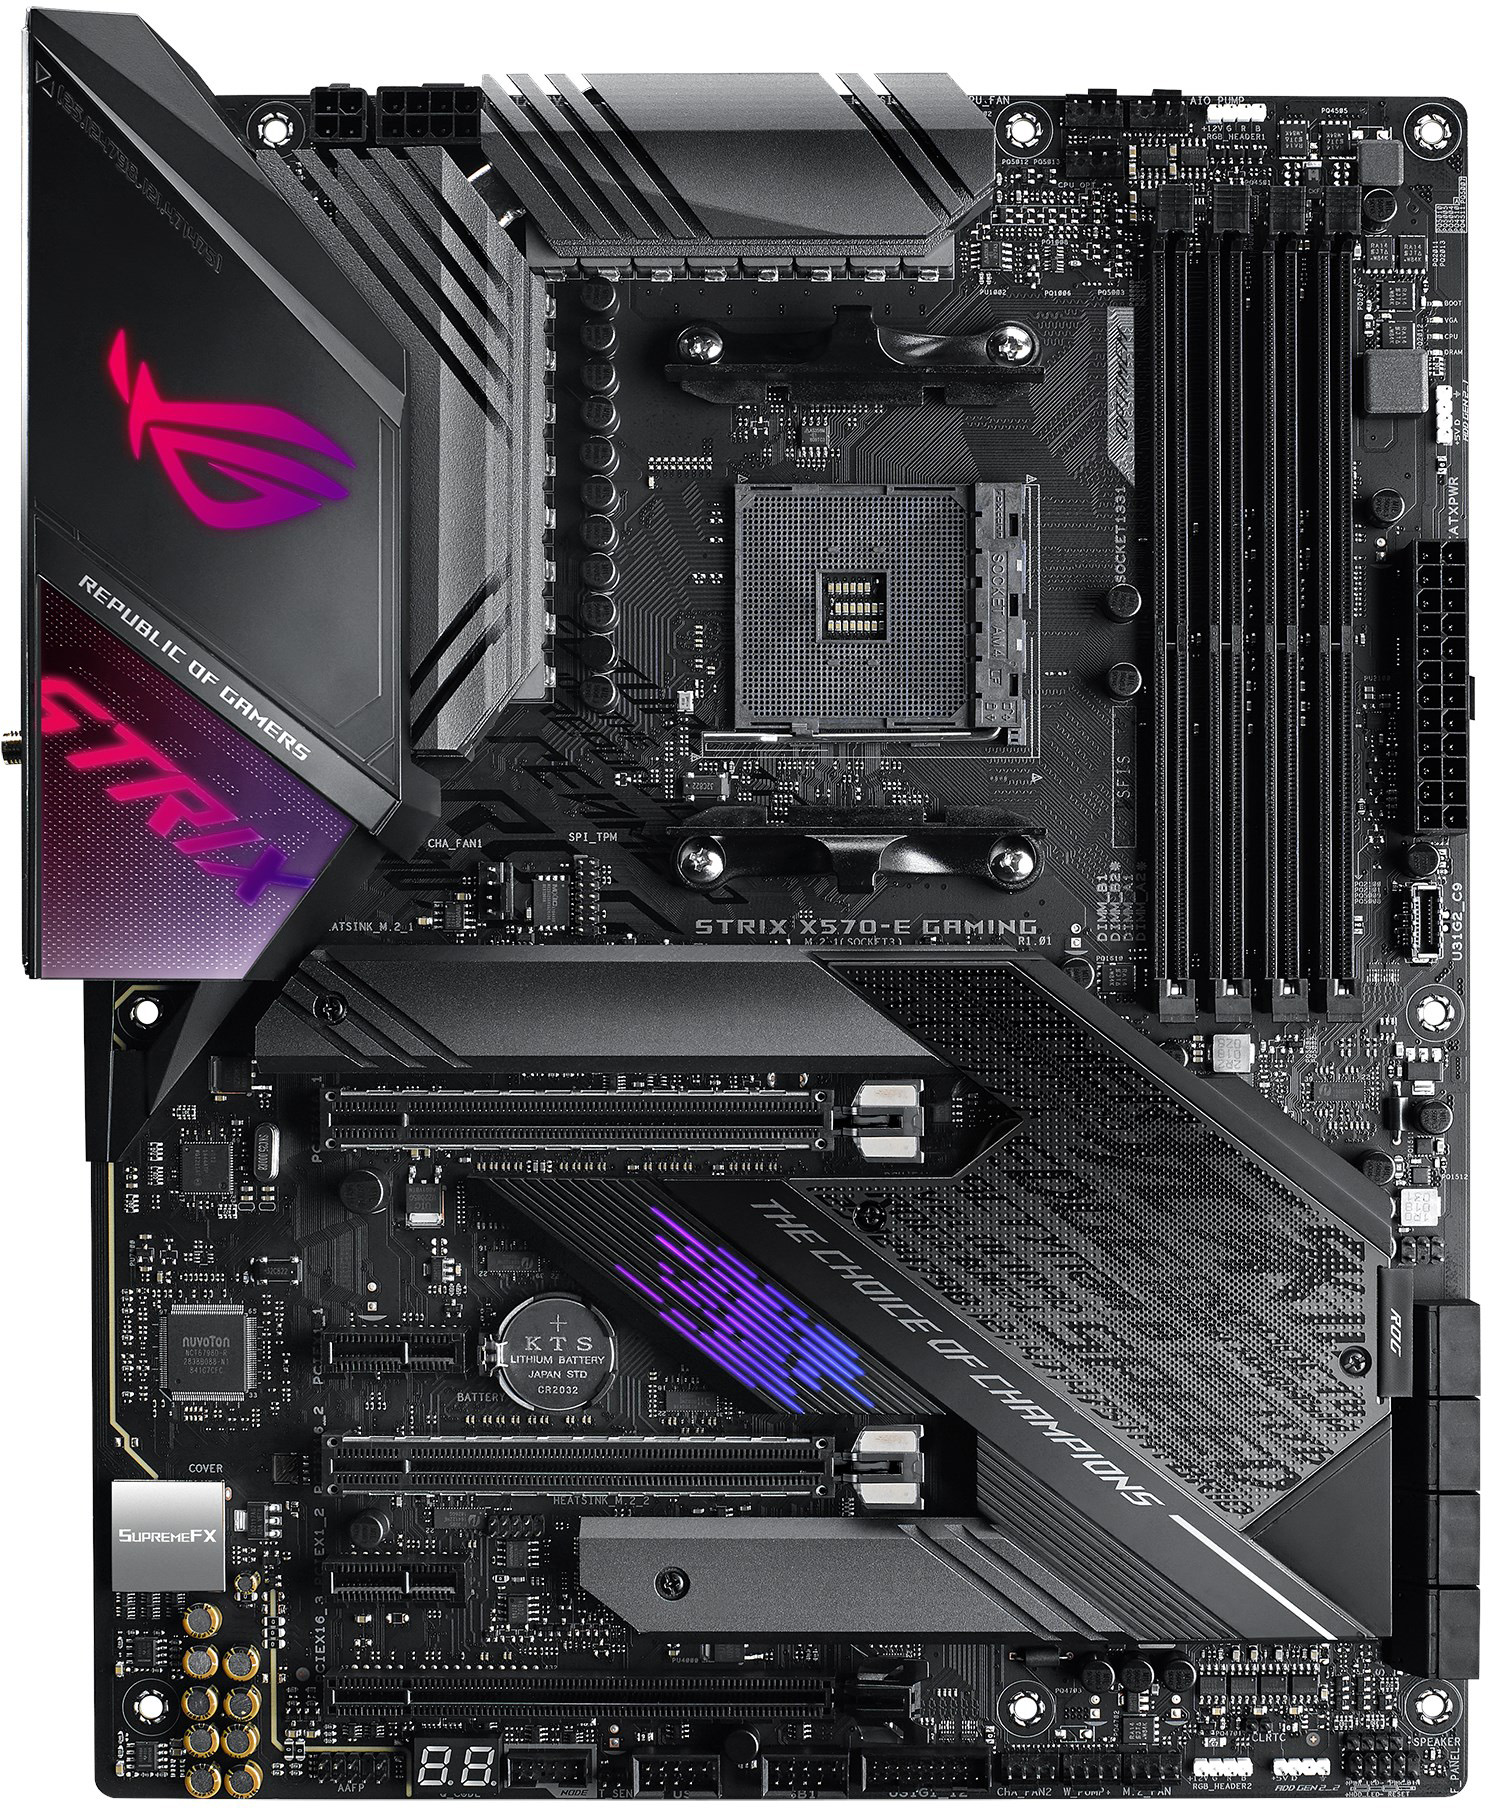 Visual Inspection - The ASUS ROG Strix X570-E Gaming Motherboard